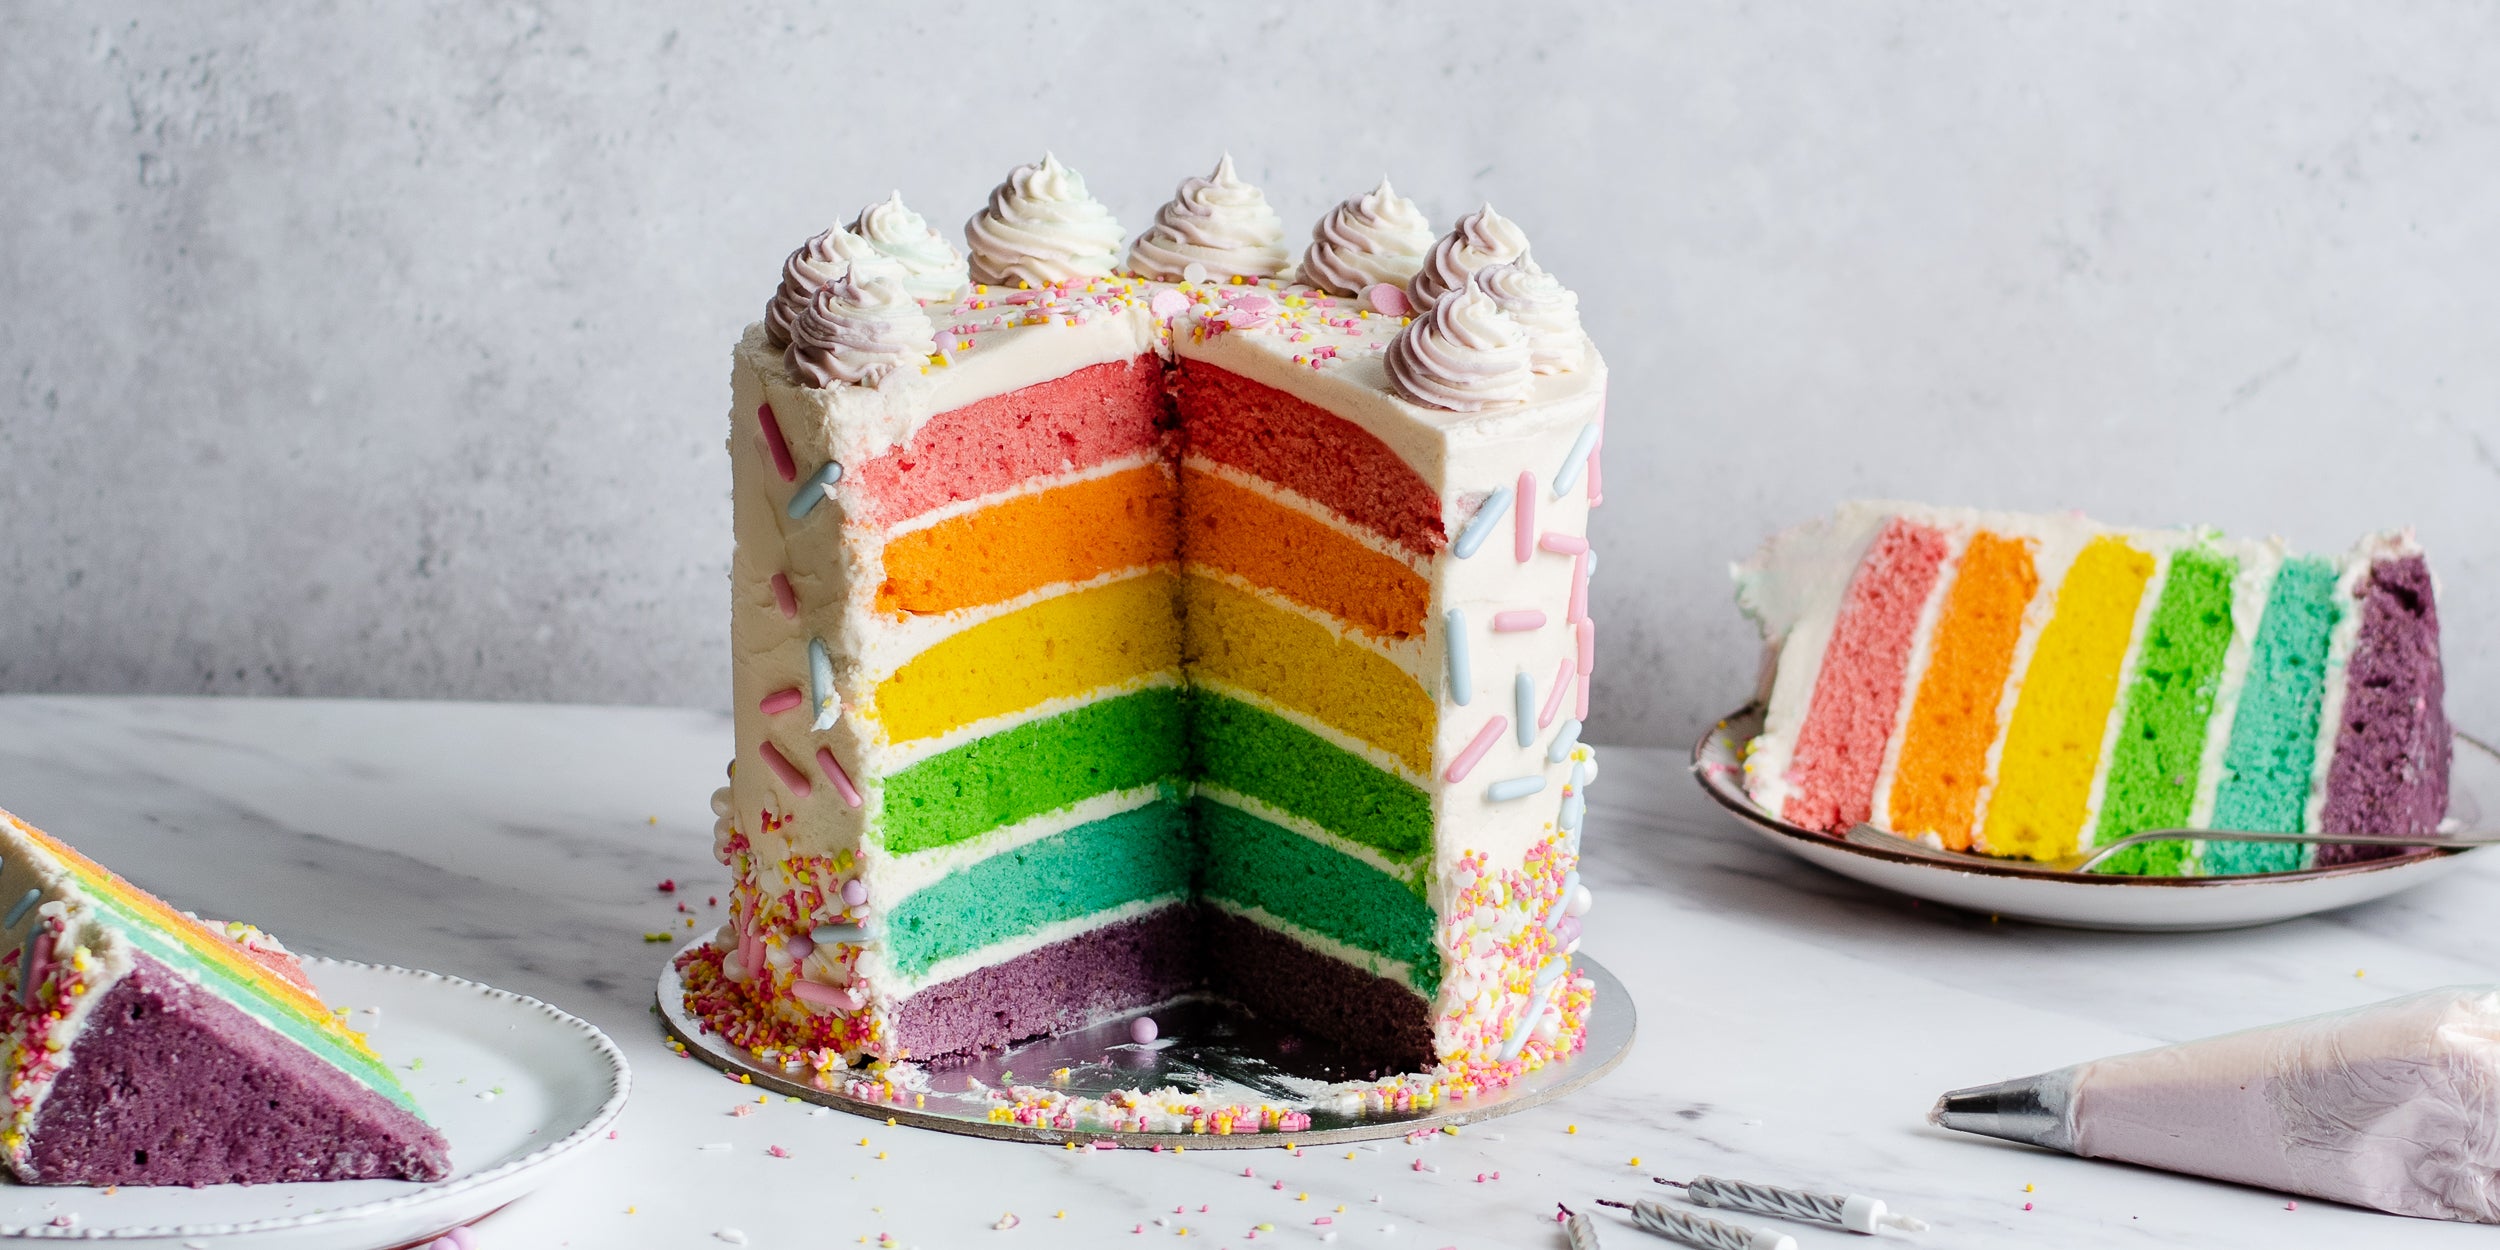 6 layer rainbow sponge cake cut open to show the layers. Two slices on white plates beside it. With piping bag and candles in forefront